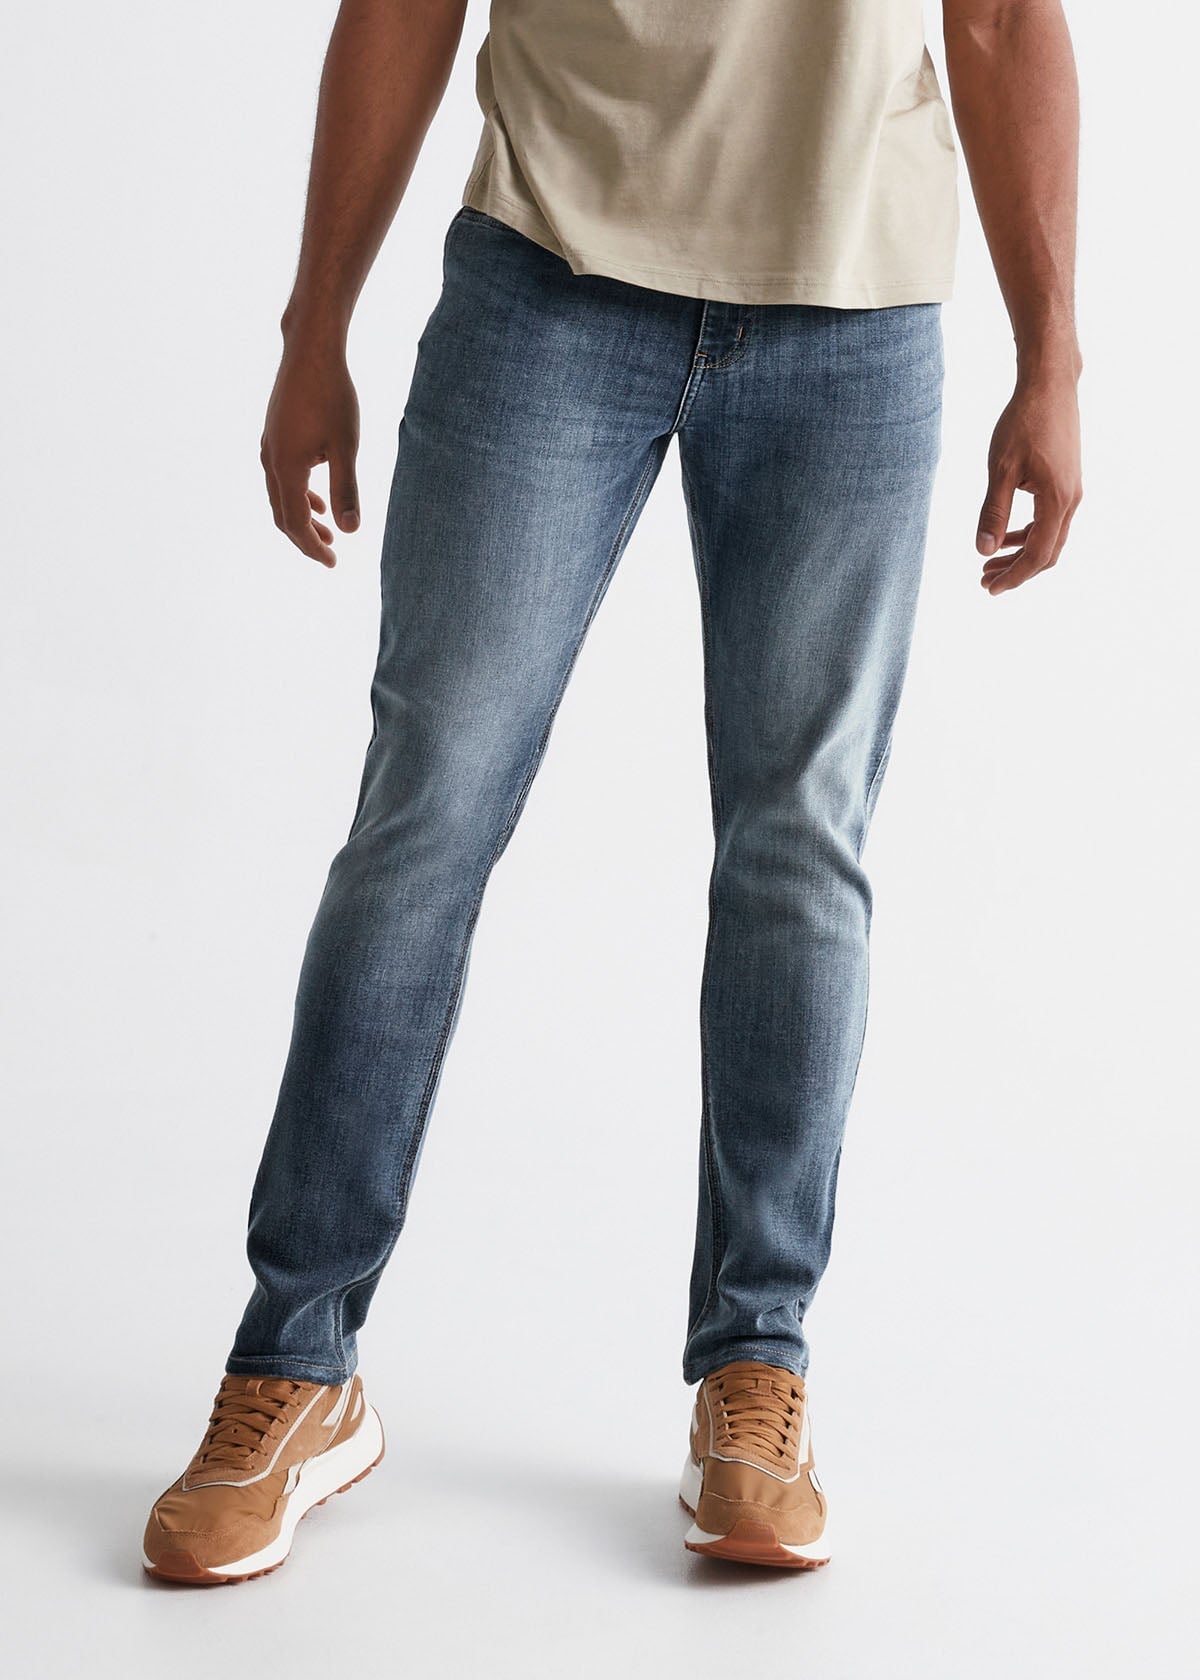 Men's Relaxed Fit Jeans